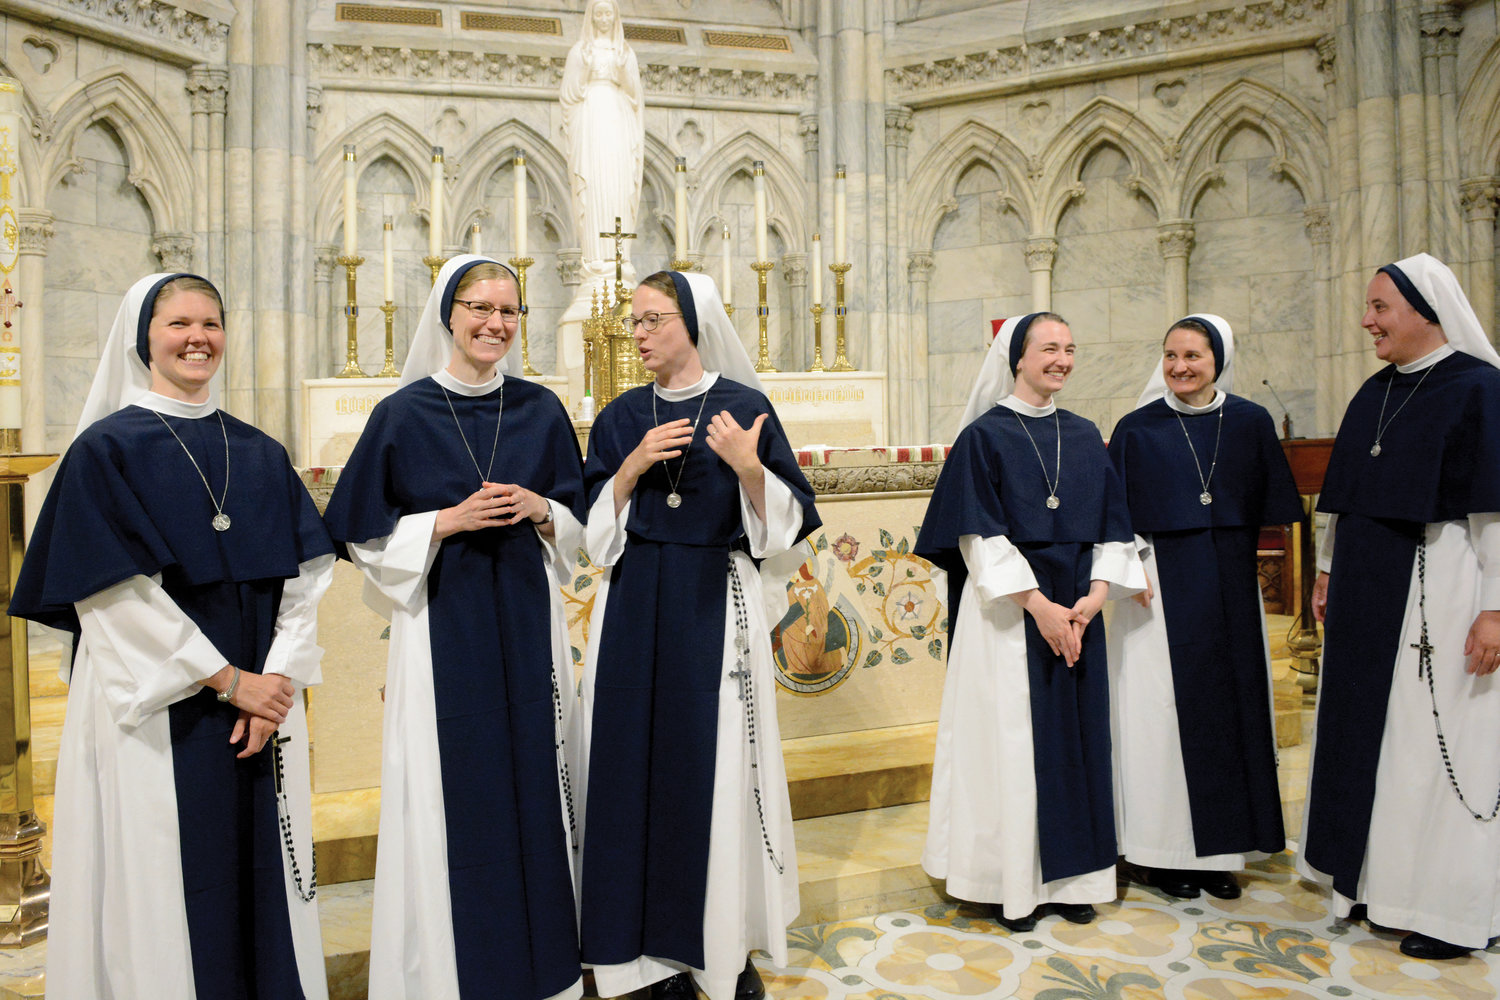 Six Sisters of Life, from left, Sister Jordan Rose, S.V.; Sister Magnificat Rose, S.V.; Sister Elizabeth Grace, S.V.; Sister Cara Marie, S.V.; Sister Pia Jude, S.V.; and Sister Maria Cristina, S.V., professed their final vows during an Aug. 6 Mass celebrated by Cardinal Dolan at St. Patrick’s Cathedral Aug. 6. The mission of the Sisters of Life is to protect human life.